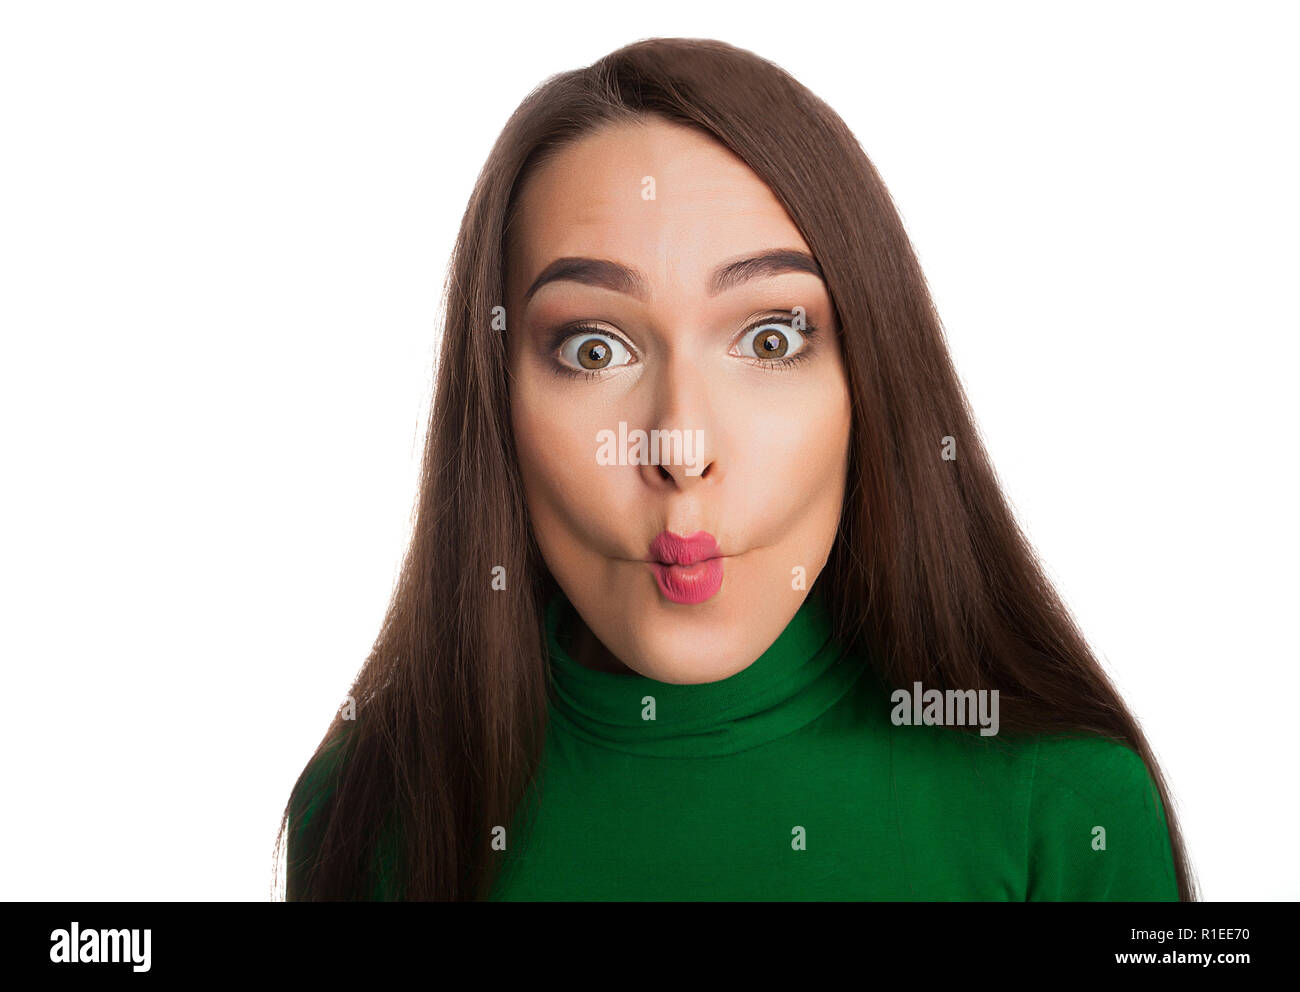 Woman in a green turtleneck Stock Photo